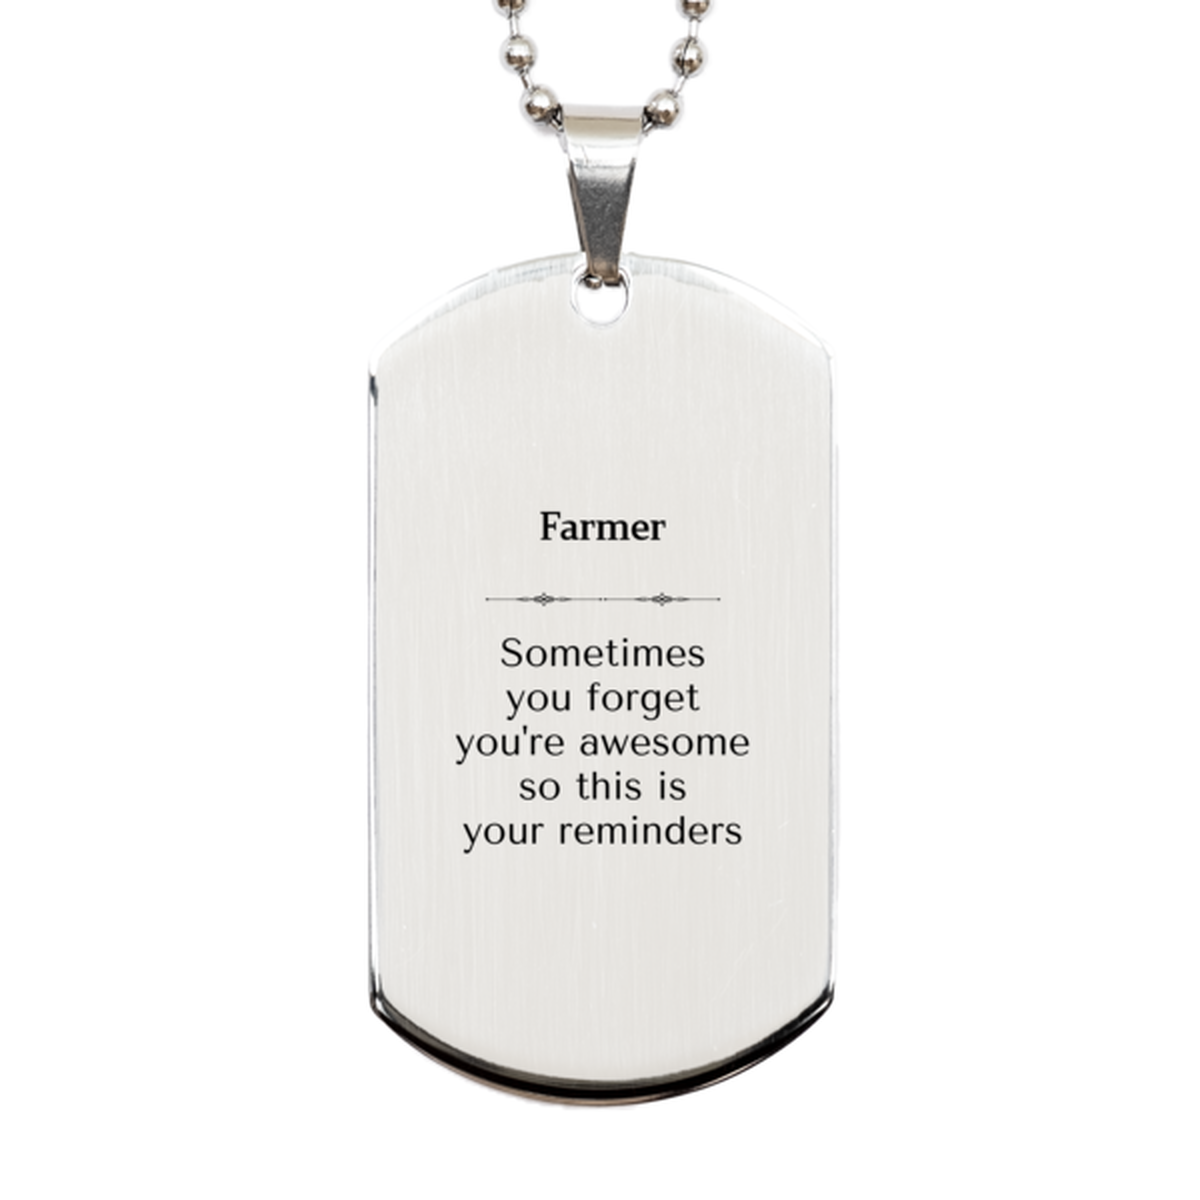 Sentimental Farmer Silver Dog Tag, Farmer Sometimes you forget you're awesome so this is your reminders, Graduation Christmas Birthday Gifts for Farmer, Men, Women, Coworkers